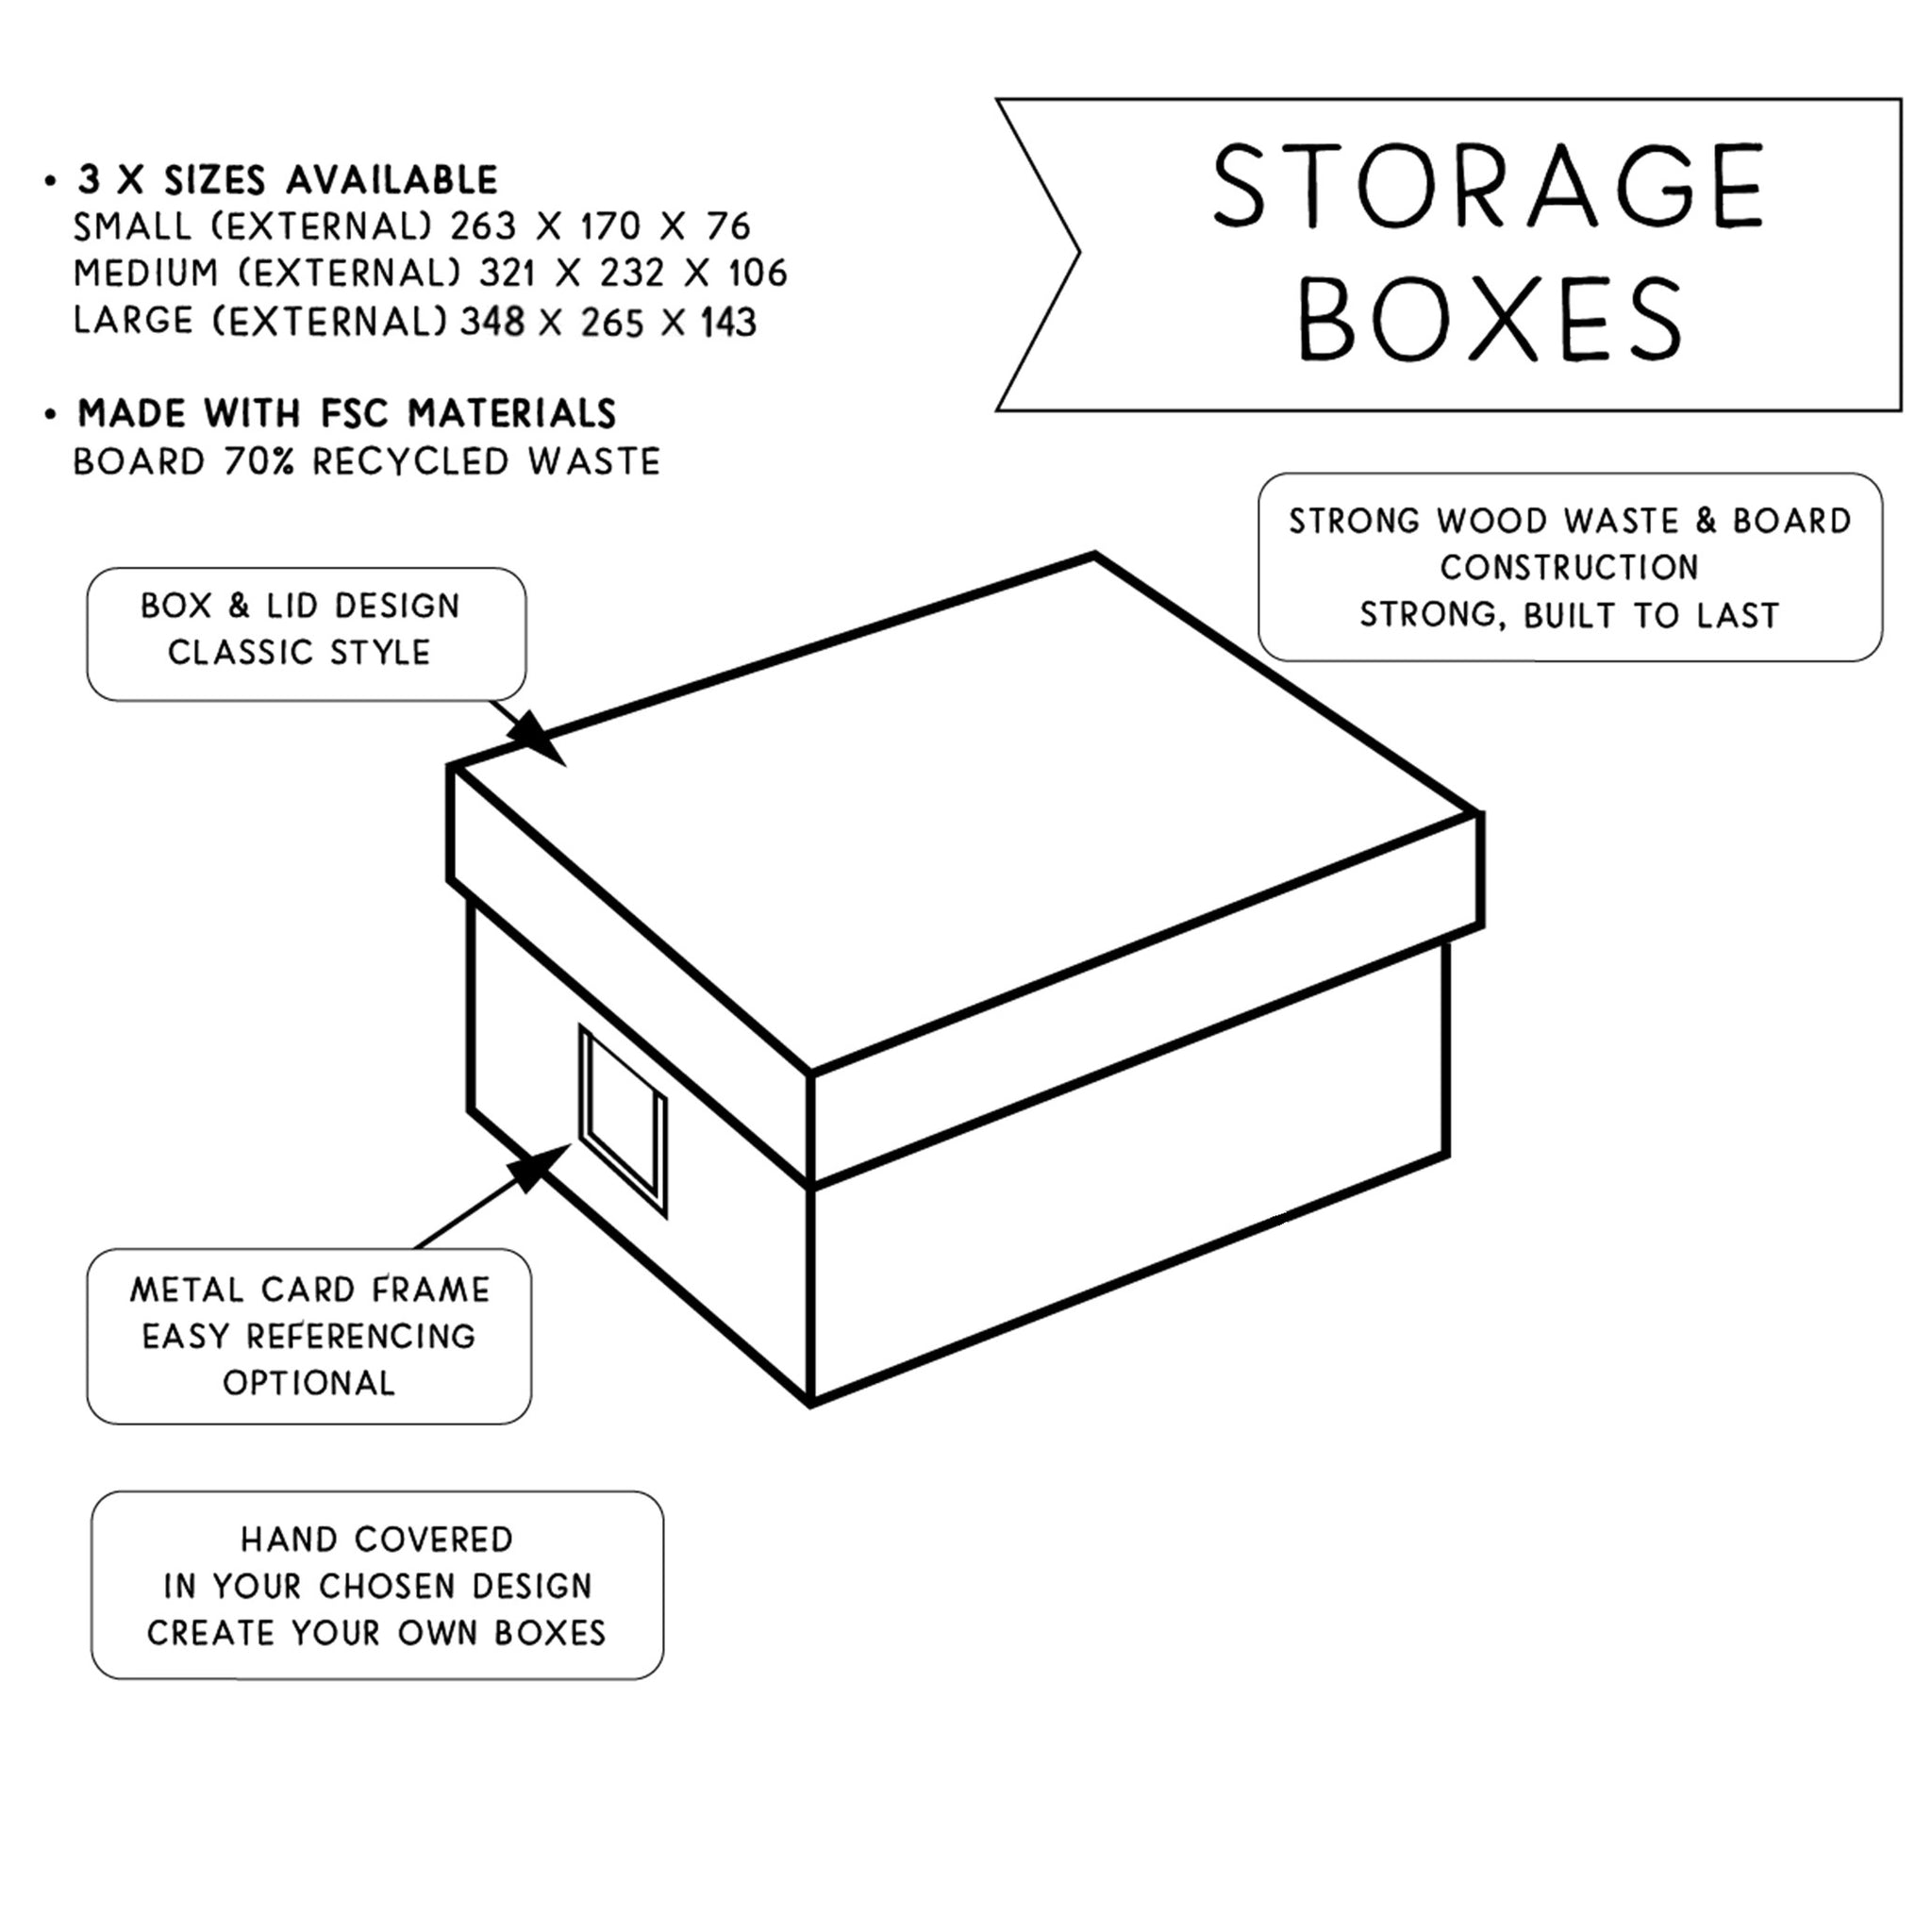 Patterned Storage Boxes